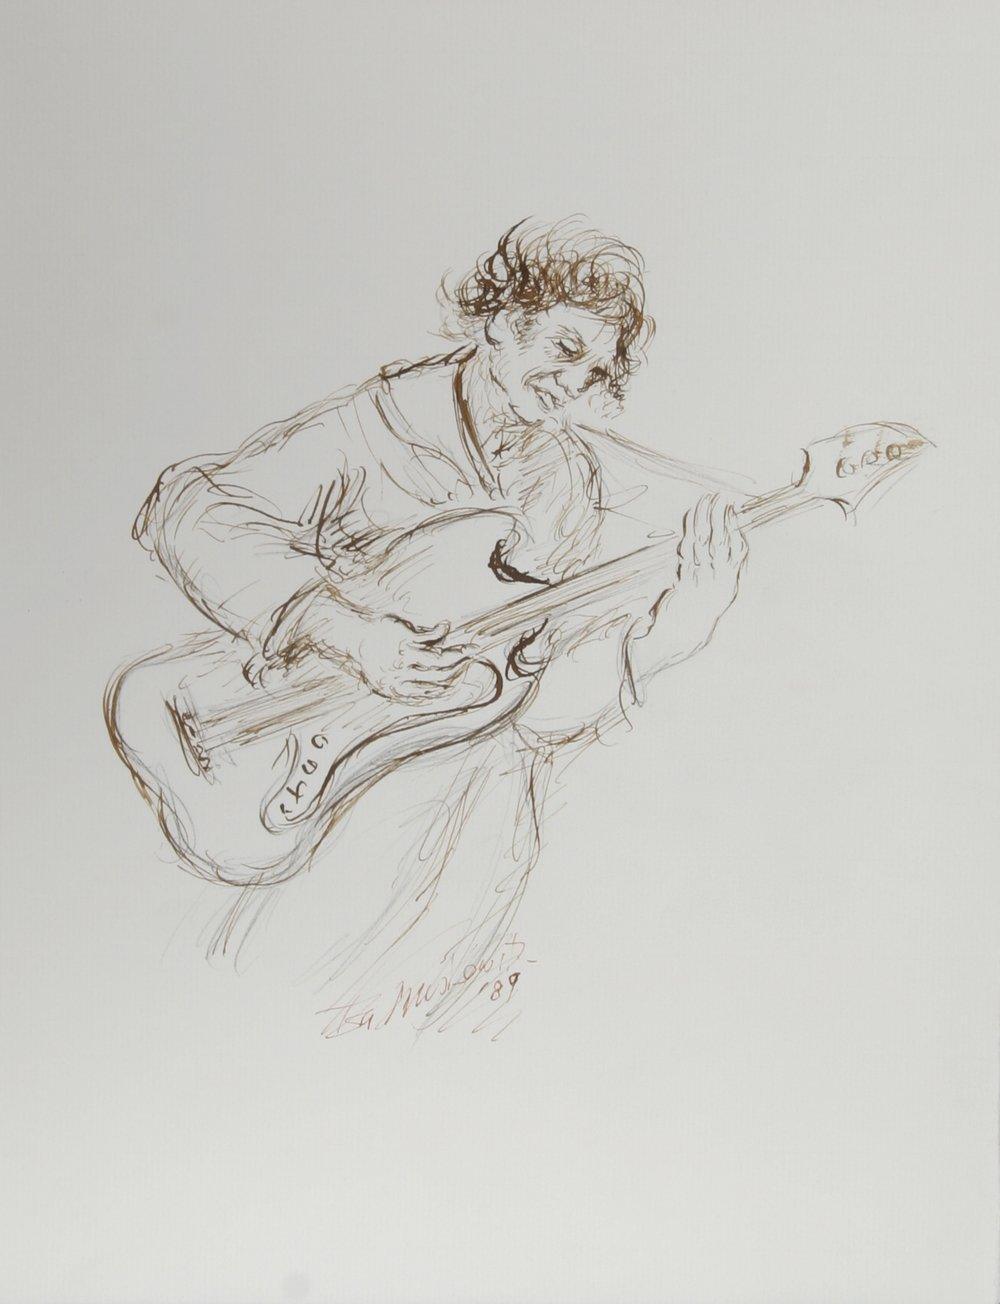 Electric Guitarist - I Ink | Ira Moskowitz,{{product.type}}